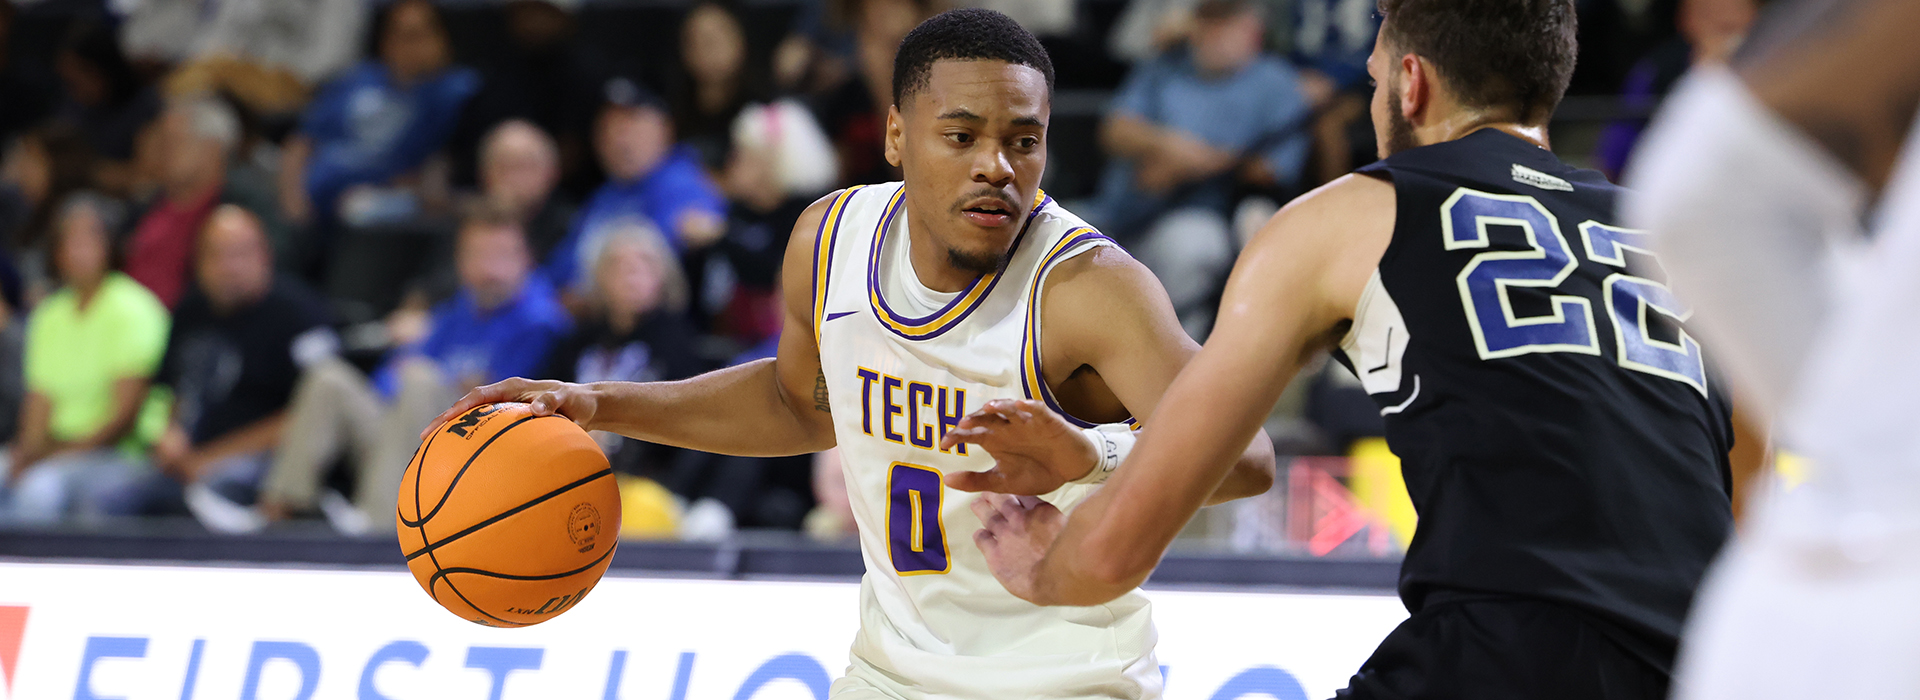 Tech kicks off three-game homestand with Thursday affair with Coppin State